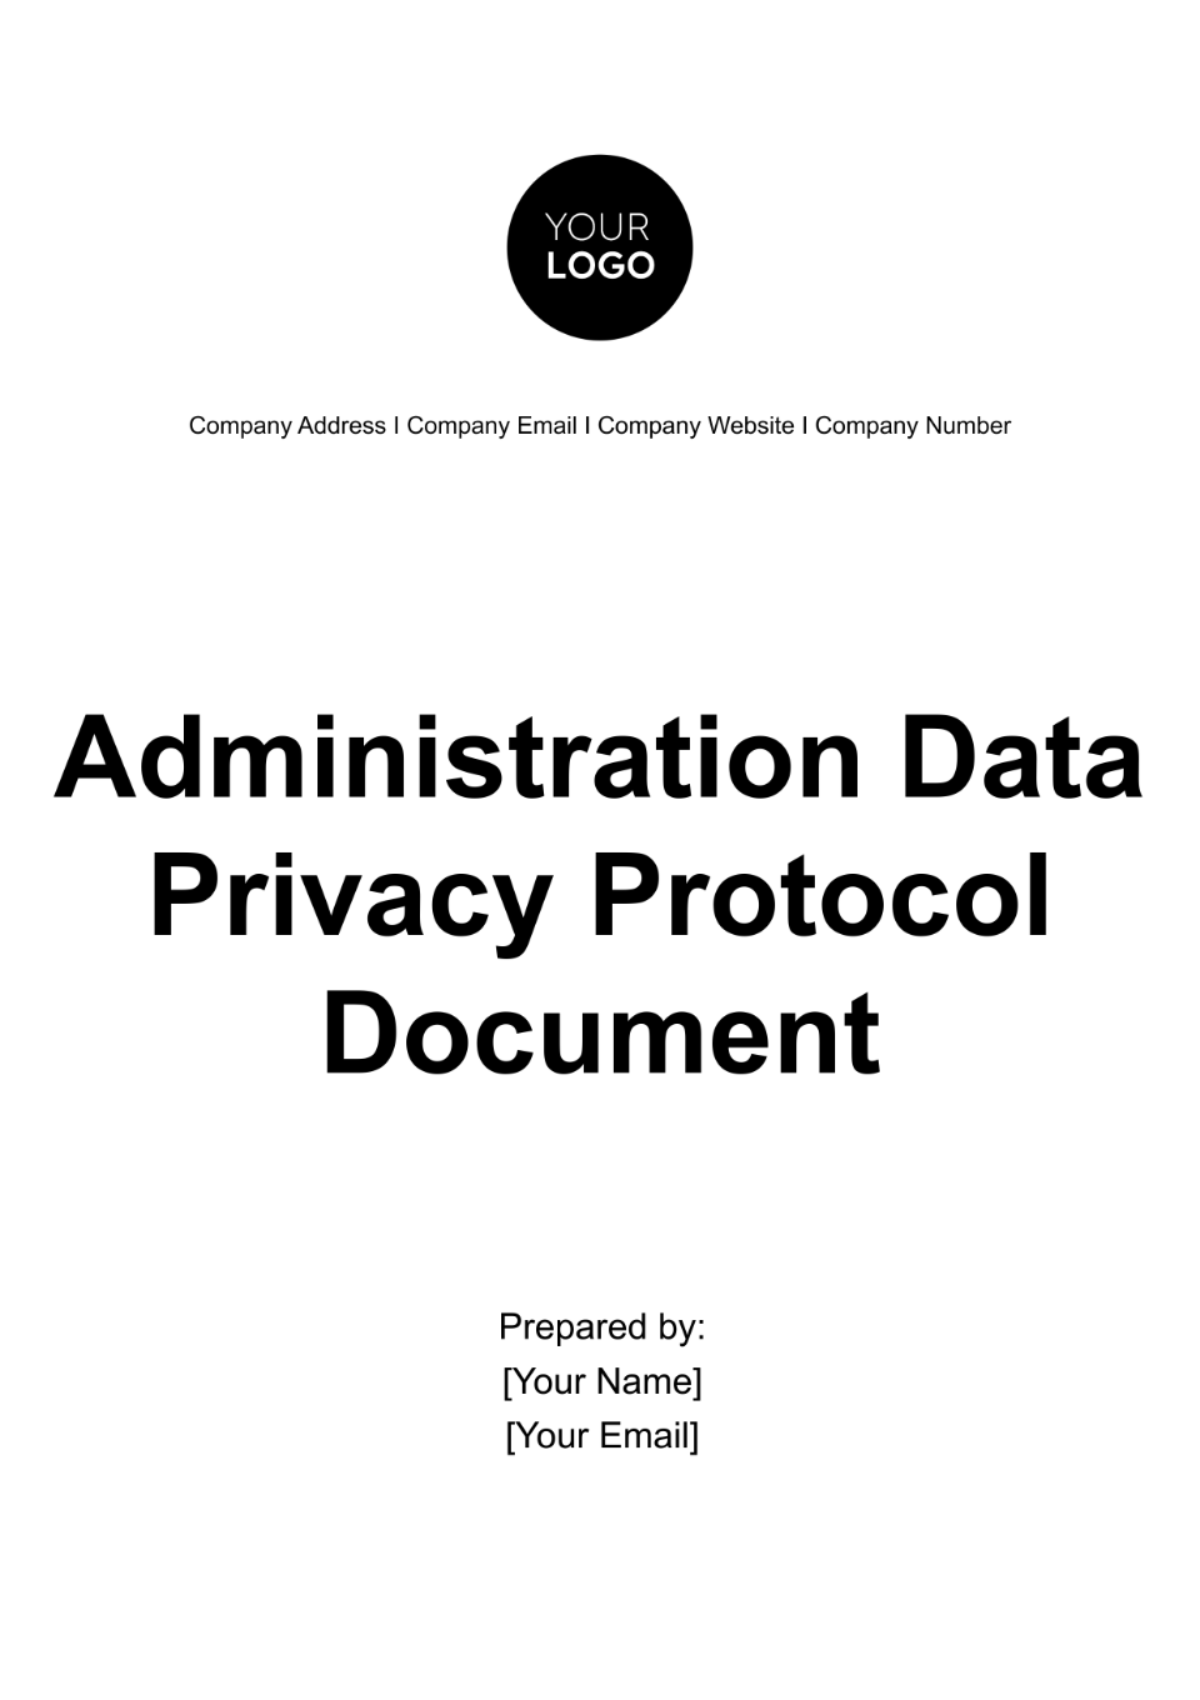 Administration Data Privacy Protocol Document Template